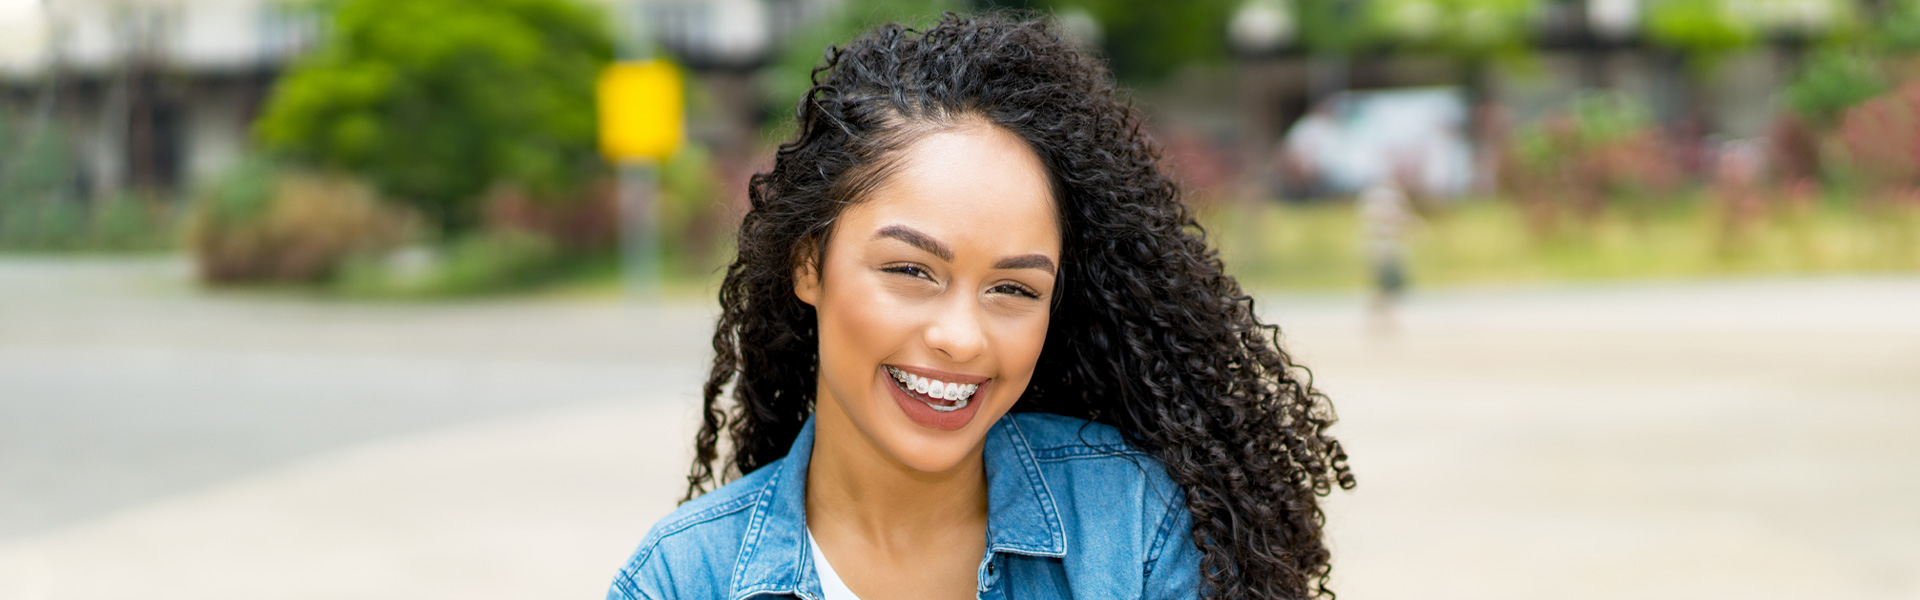 Clear Aligners Or Metal Braces? Here's How To Choose 